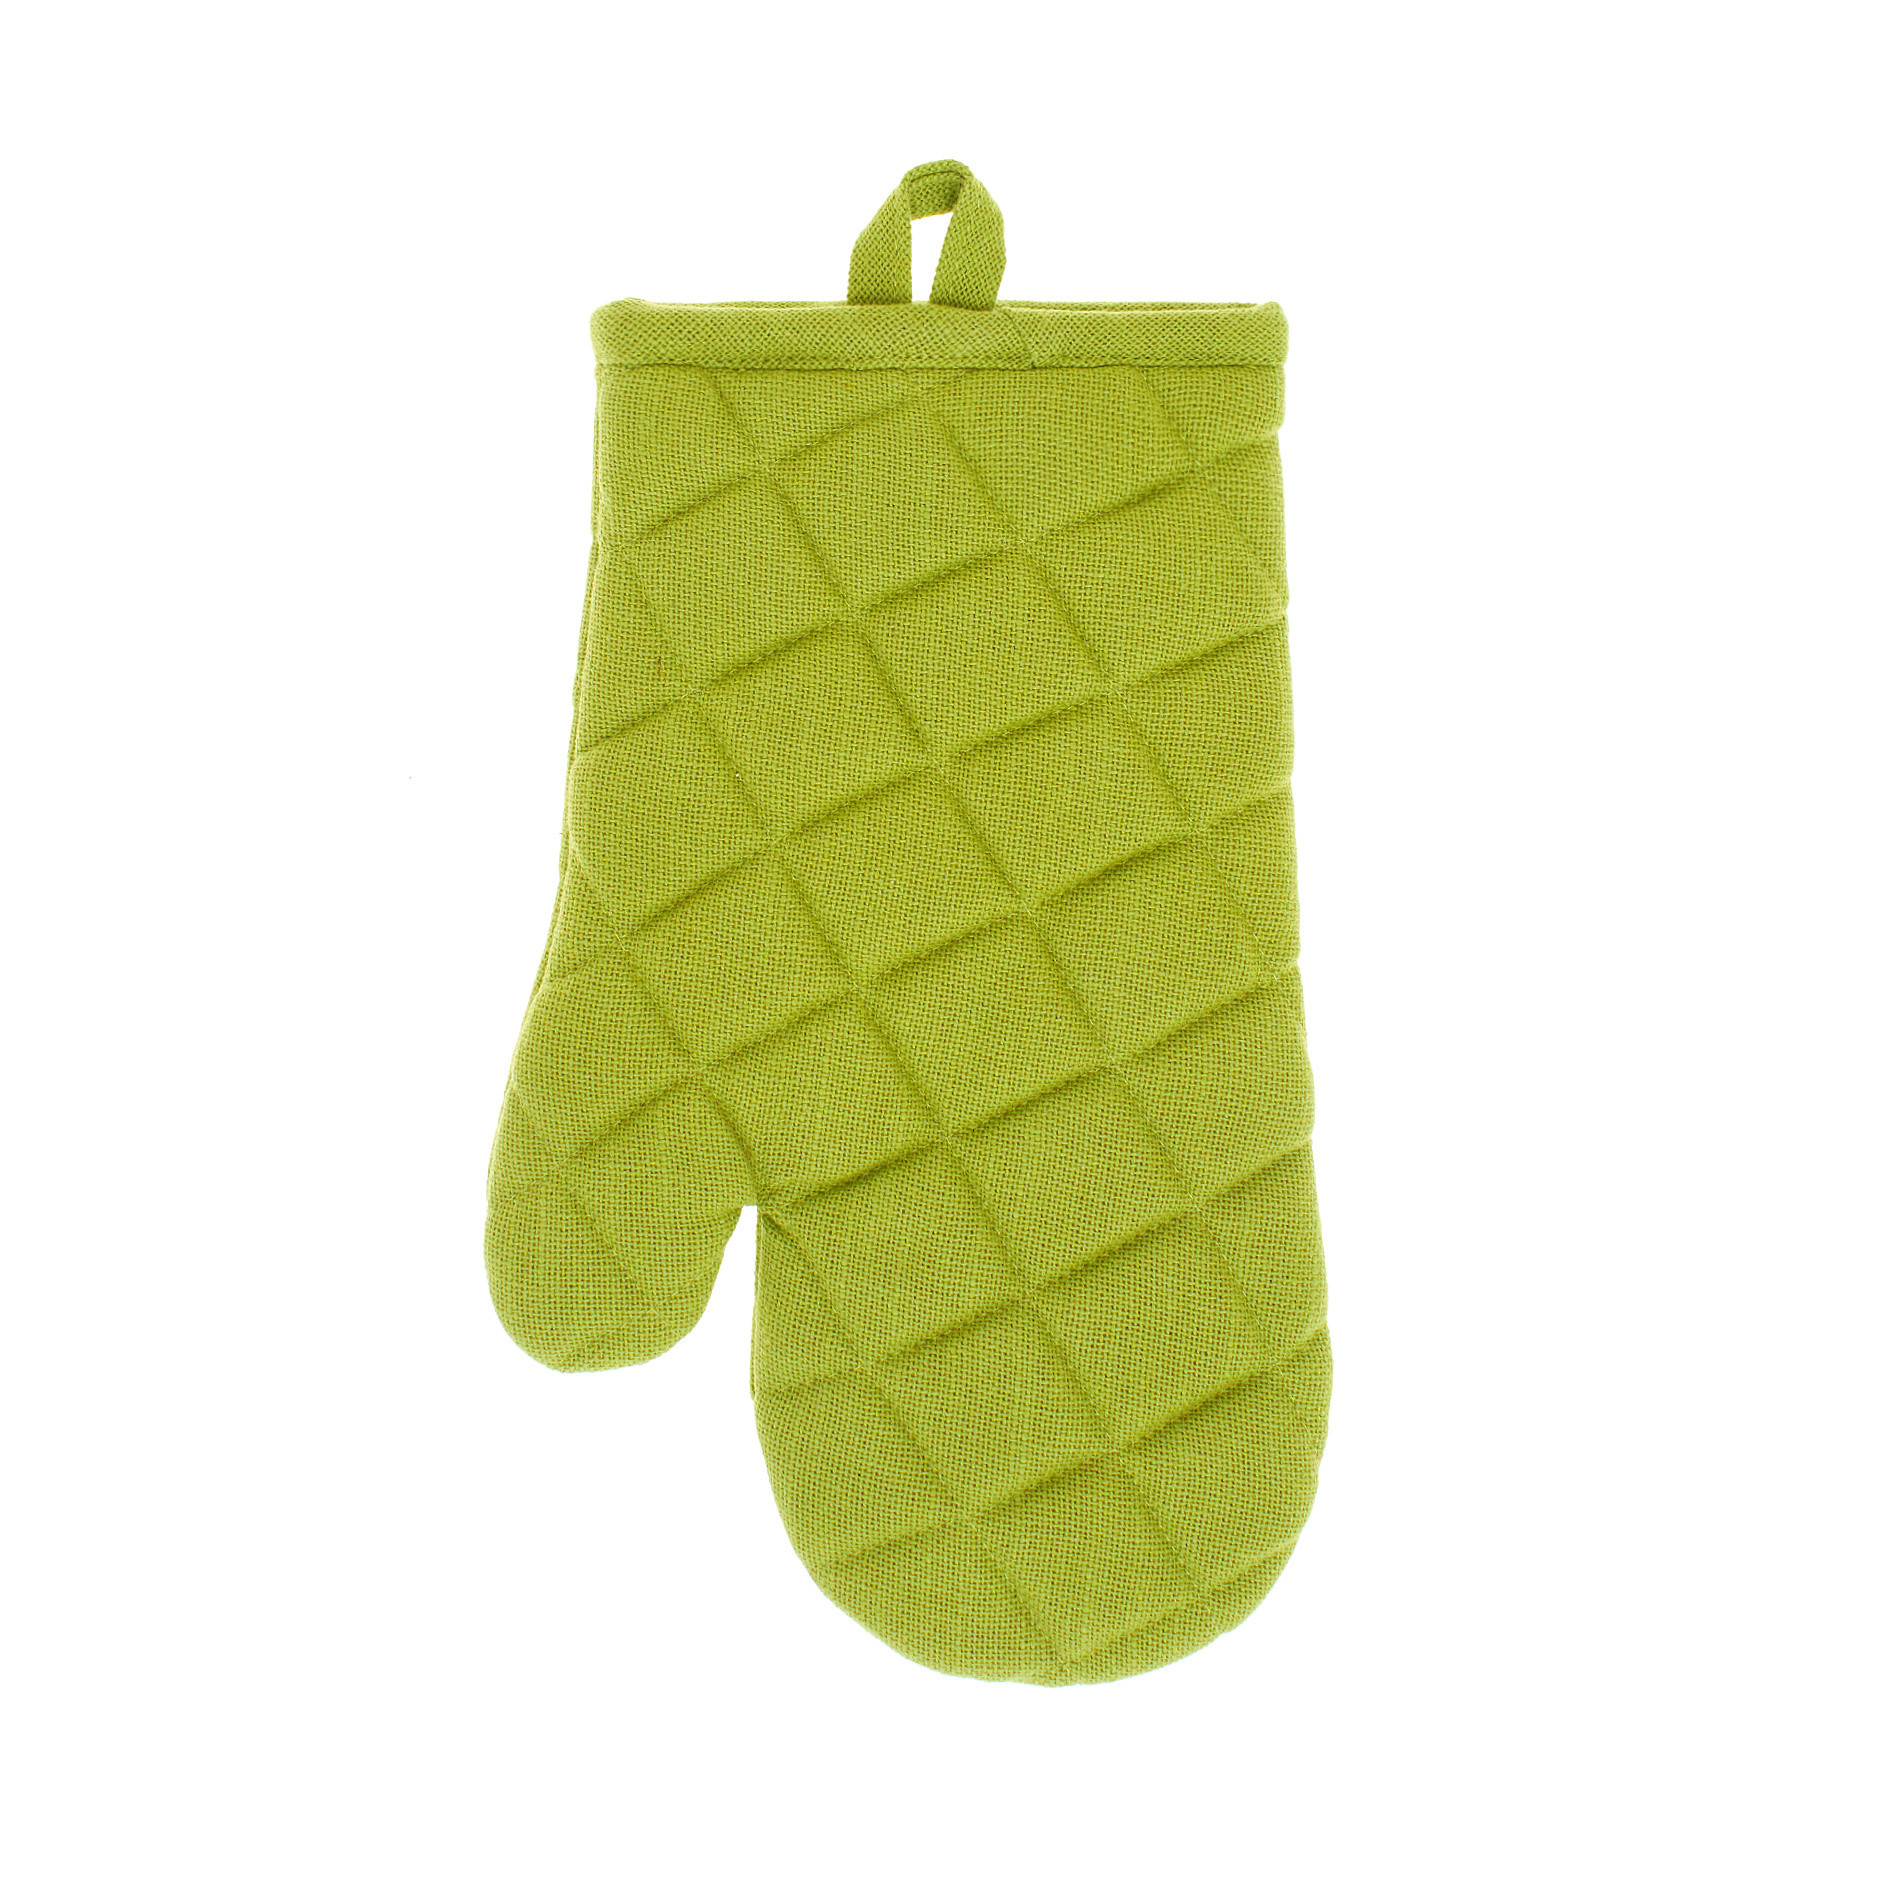 Kitchen mitt in pure iridescent cotton, Green Apple, large image number 0